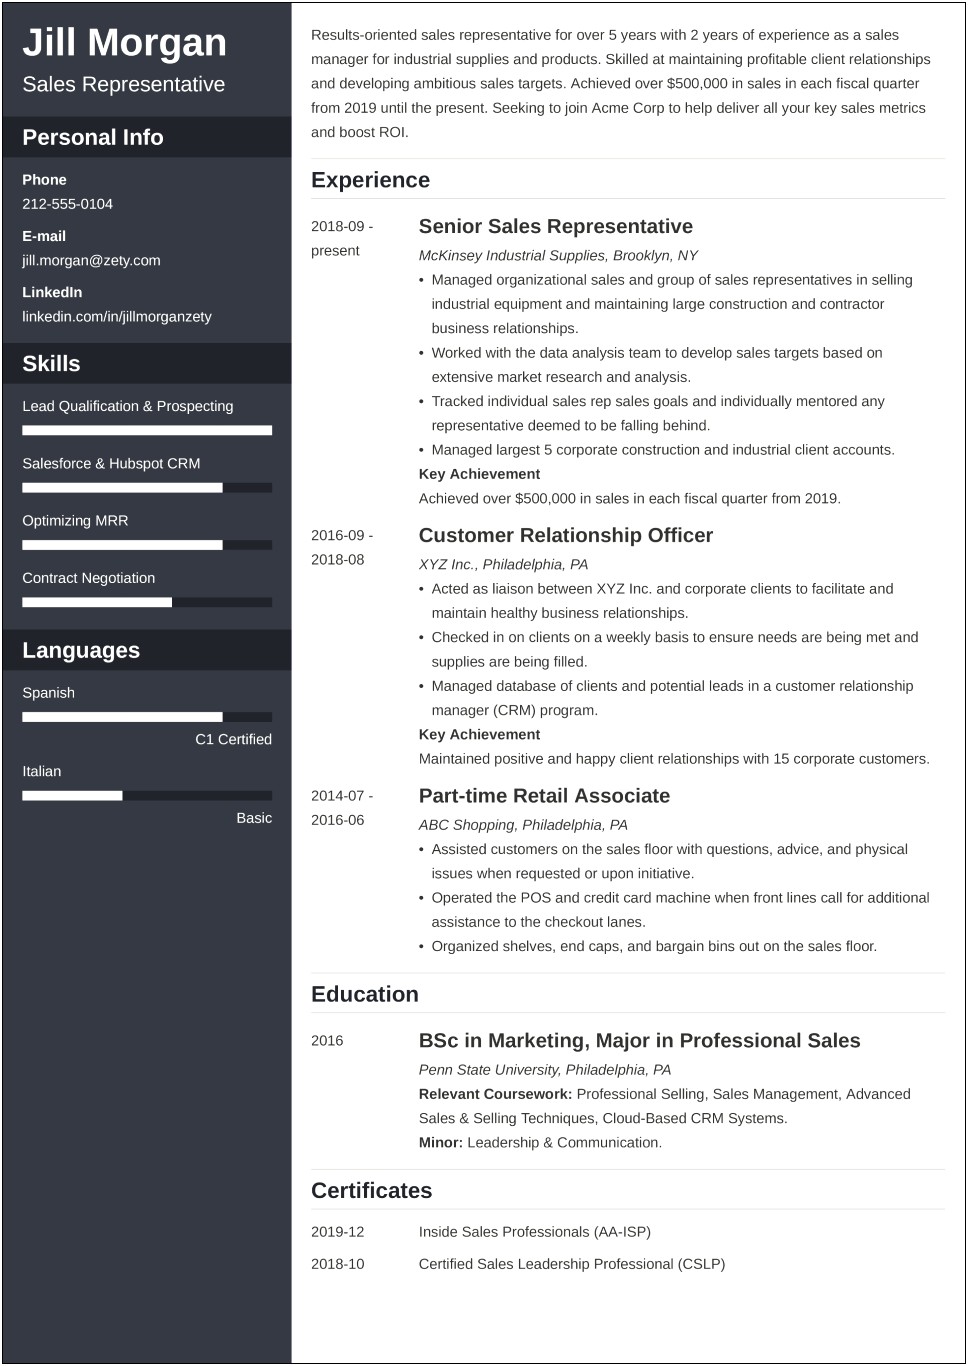 Is Template.net Resume Templates Reputable